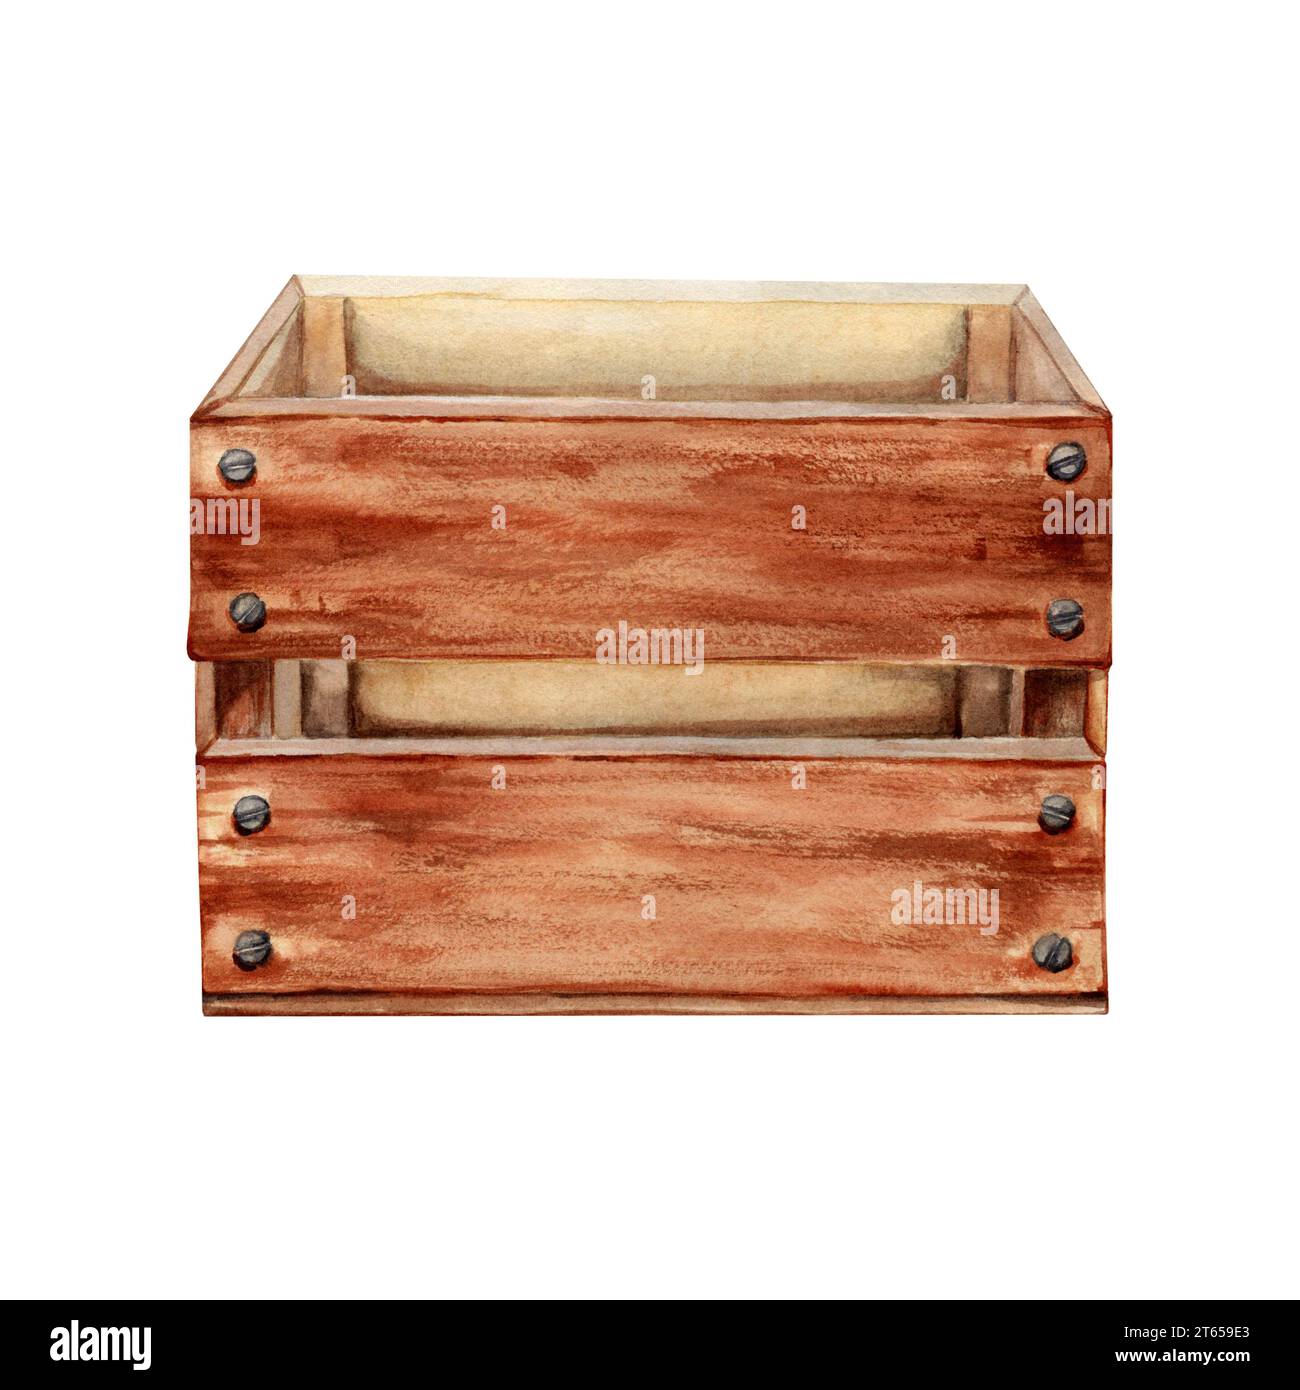 A rustic wooden crate. Box for carrying wine, food, organic produce, fruits, vegetables. Picnic, cheese and wine tasting collection. Hand drawn. Stock Photo